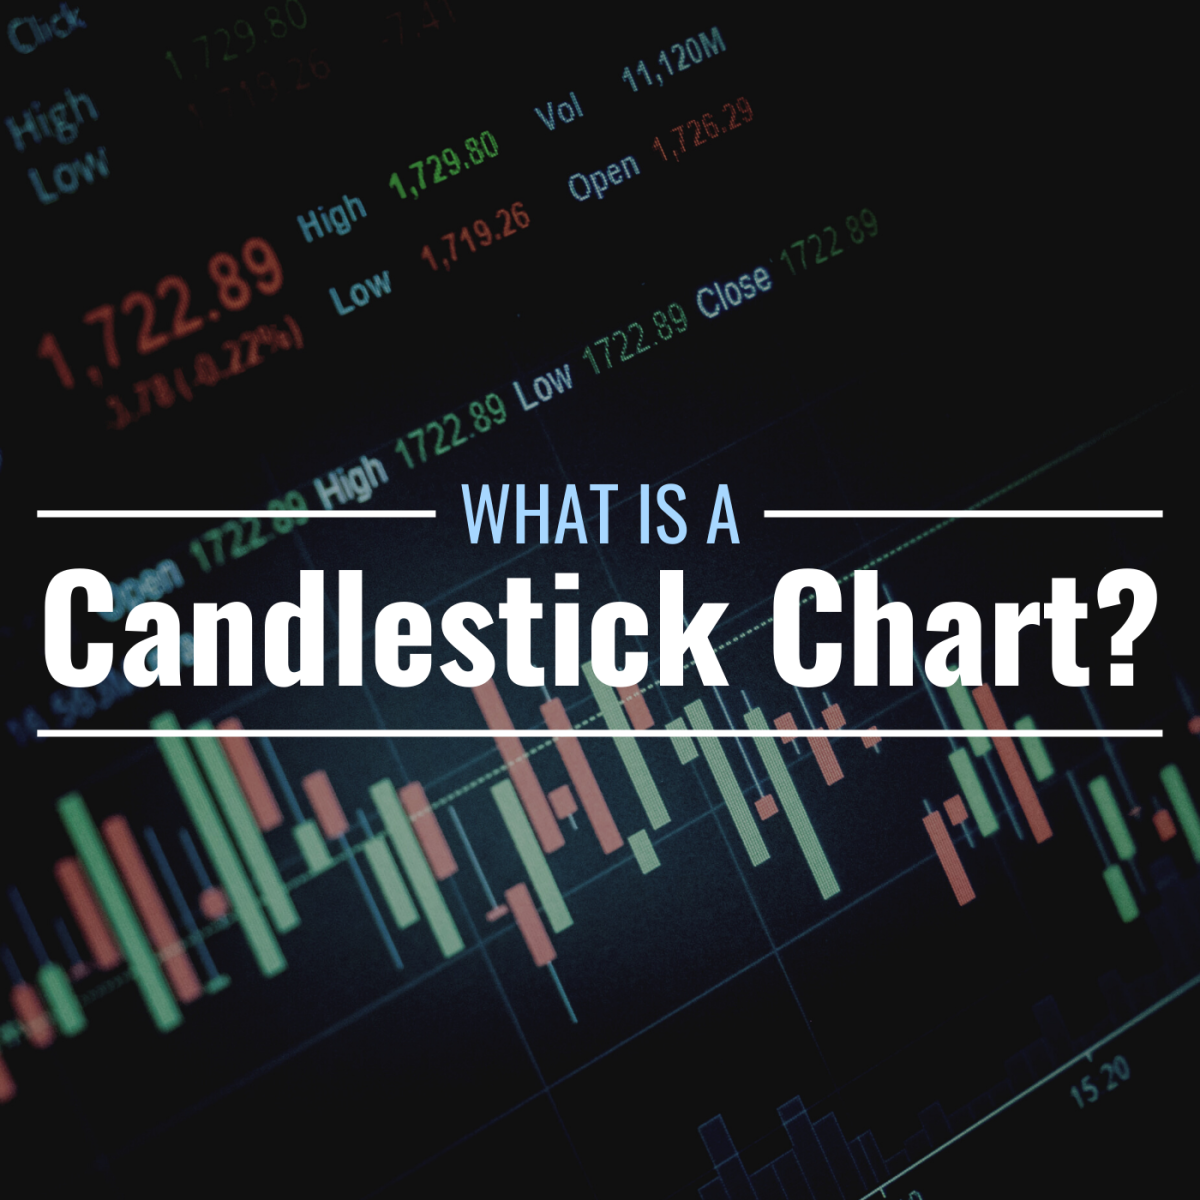 30000 Candlestick Chart Pictures  Download Free Images on Unsplash